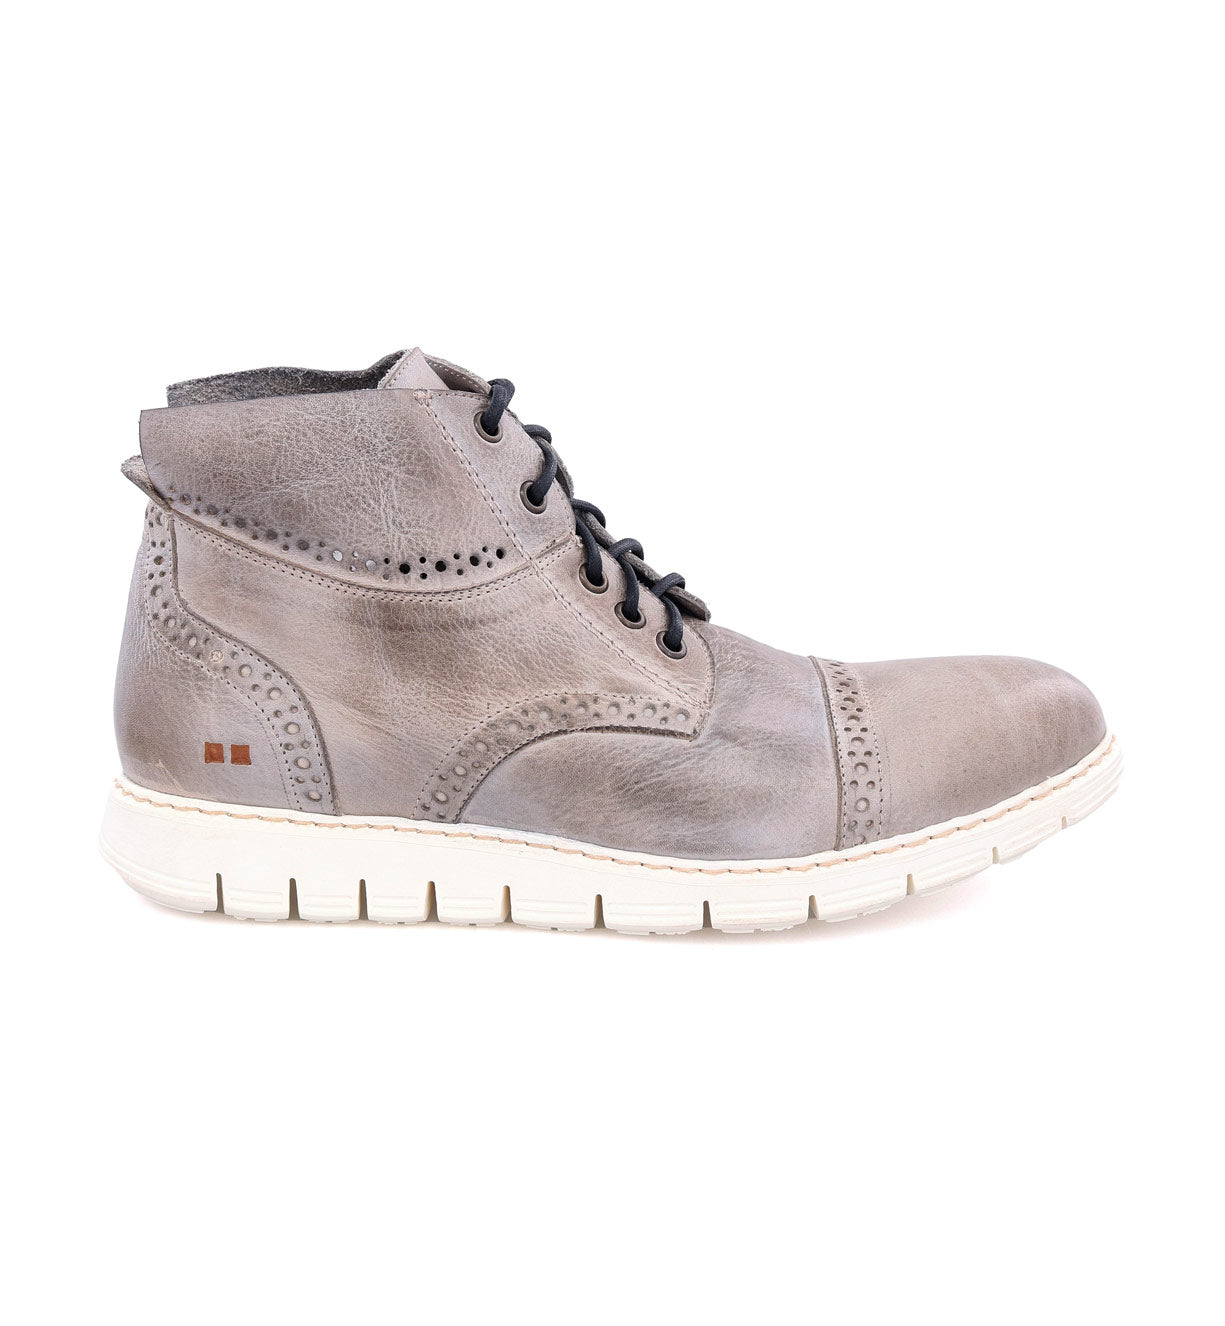 Men's Bowery II grey leather lace up boots by Bed Stu.